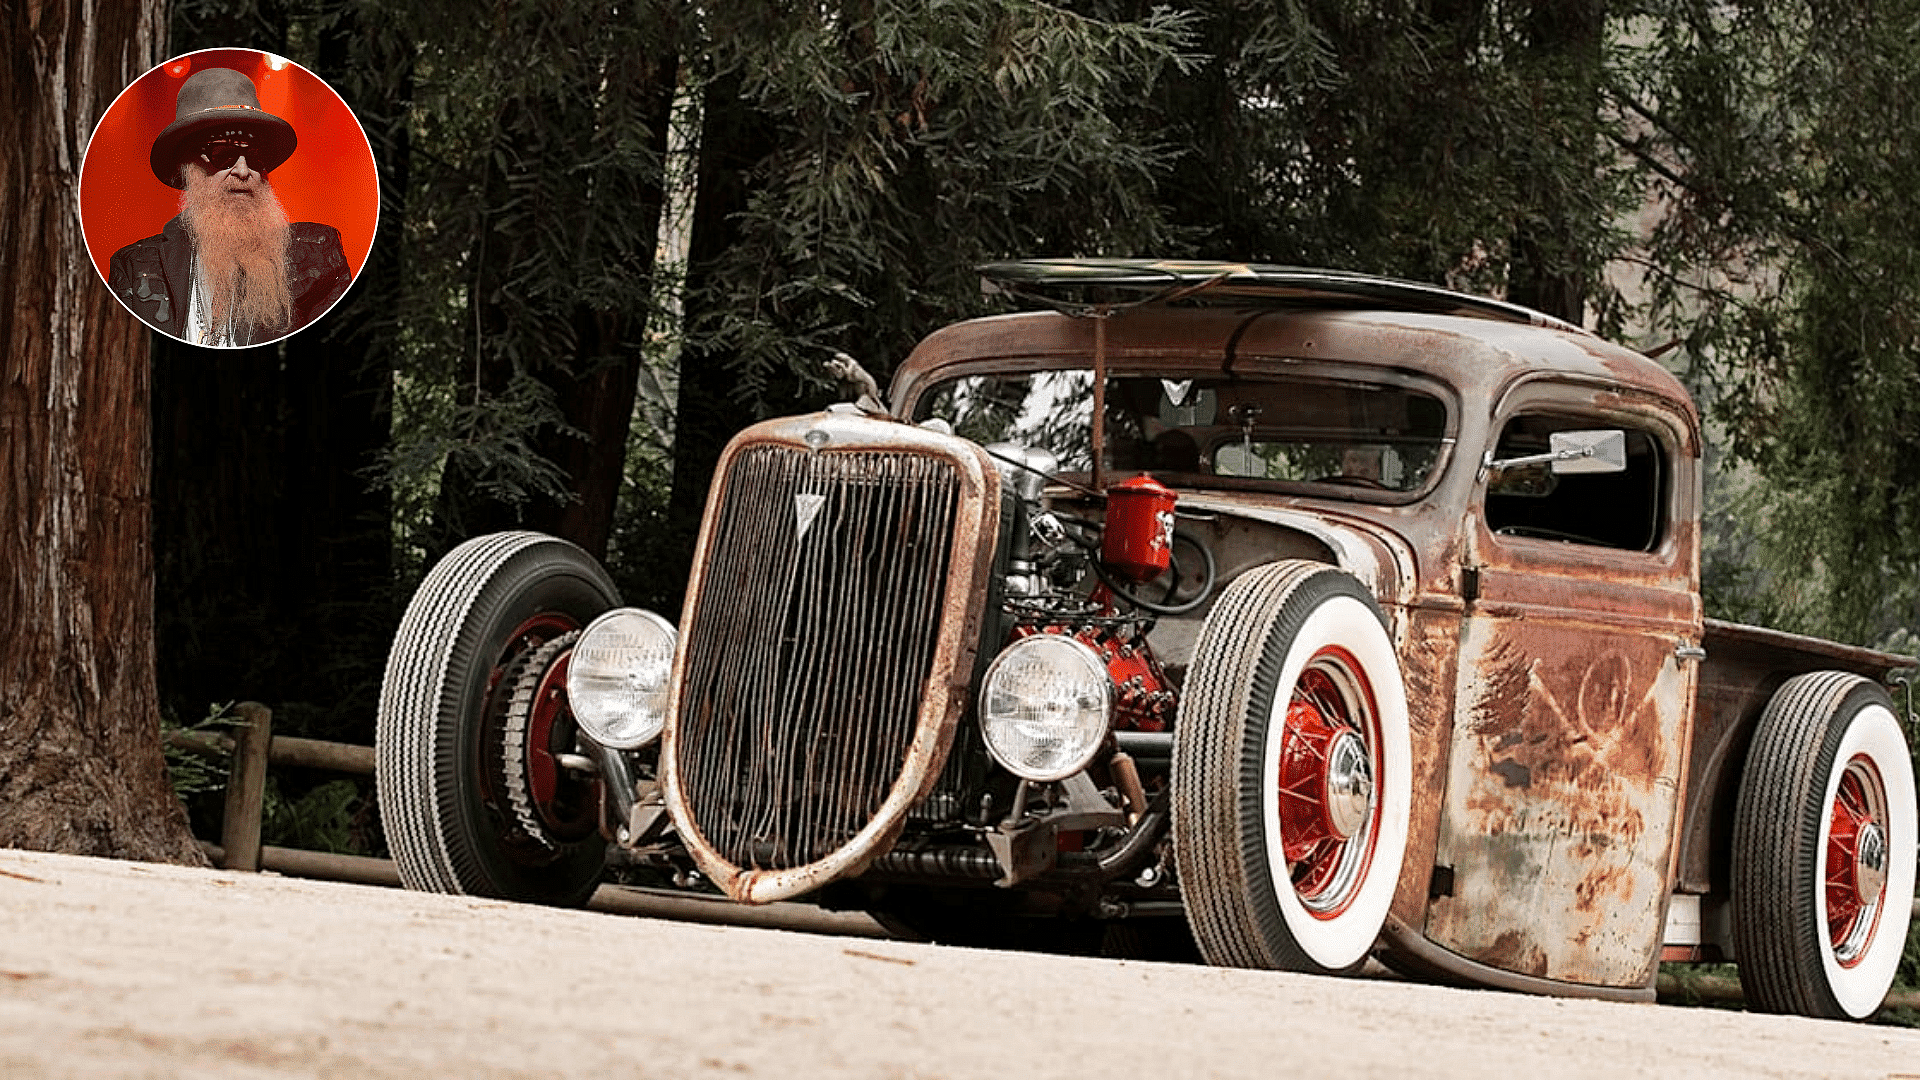 Billy F. Gibbons 1936 Ford Truck ‘Rat Rod’